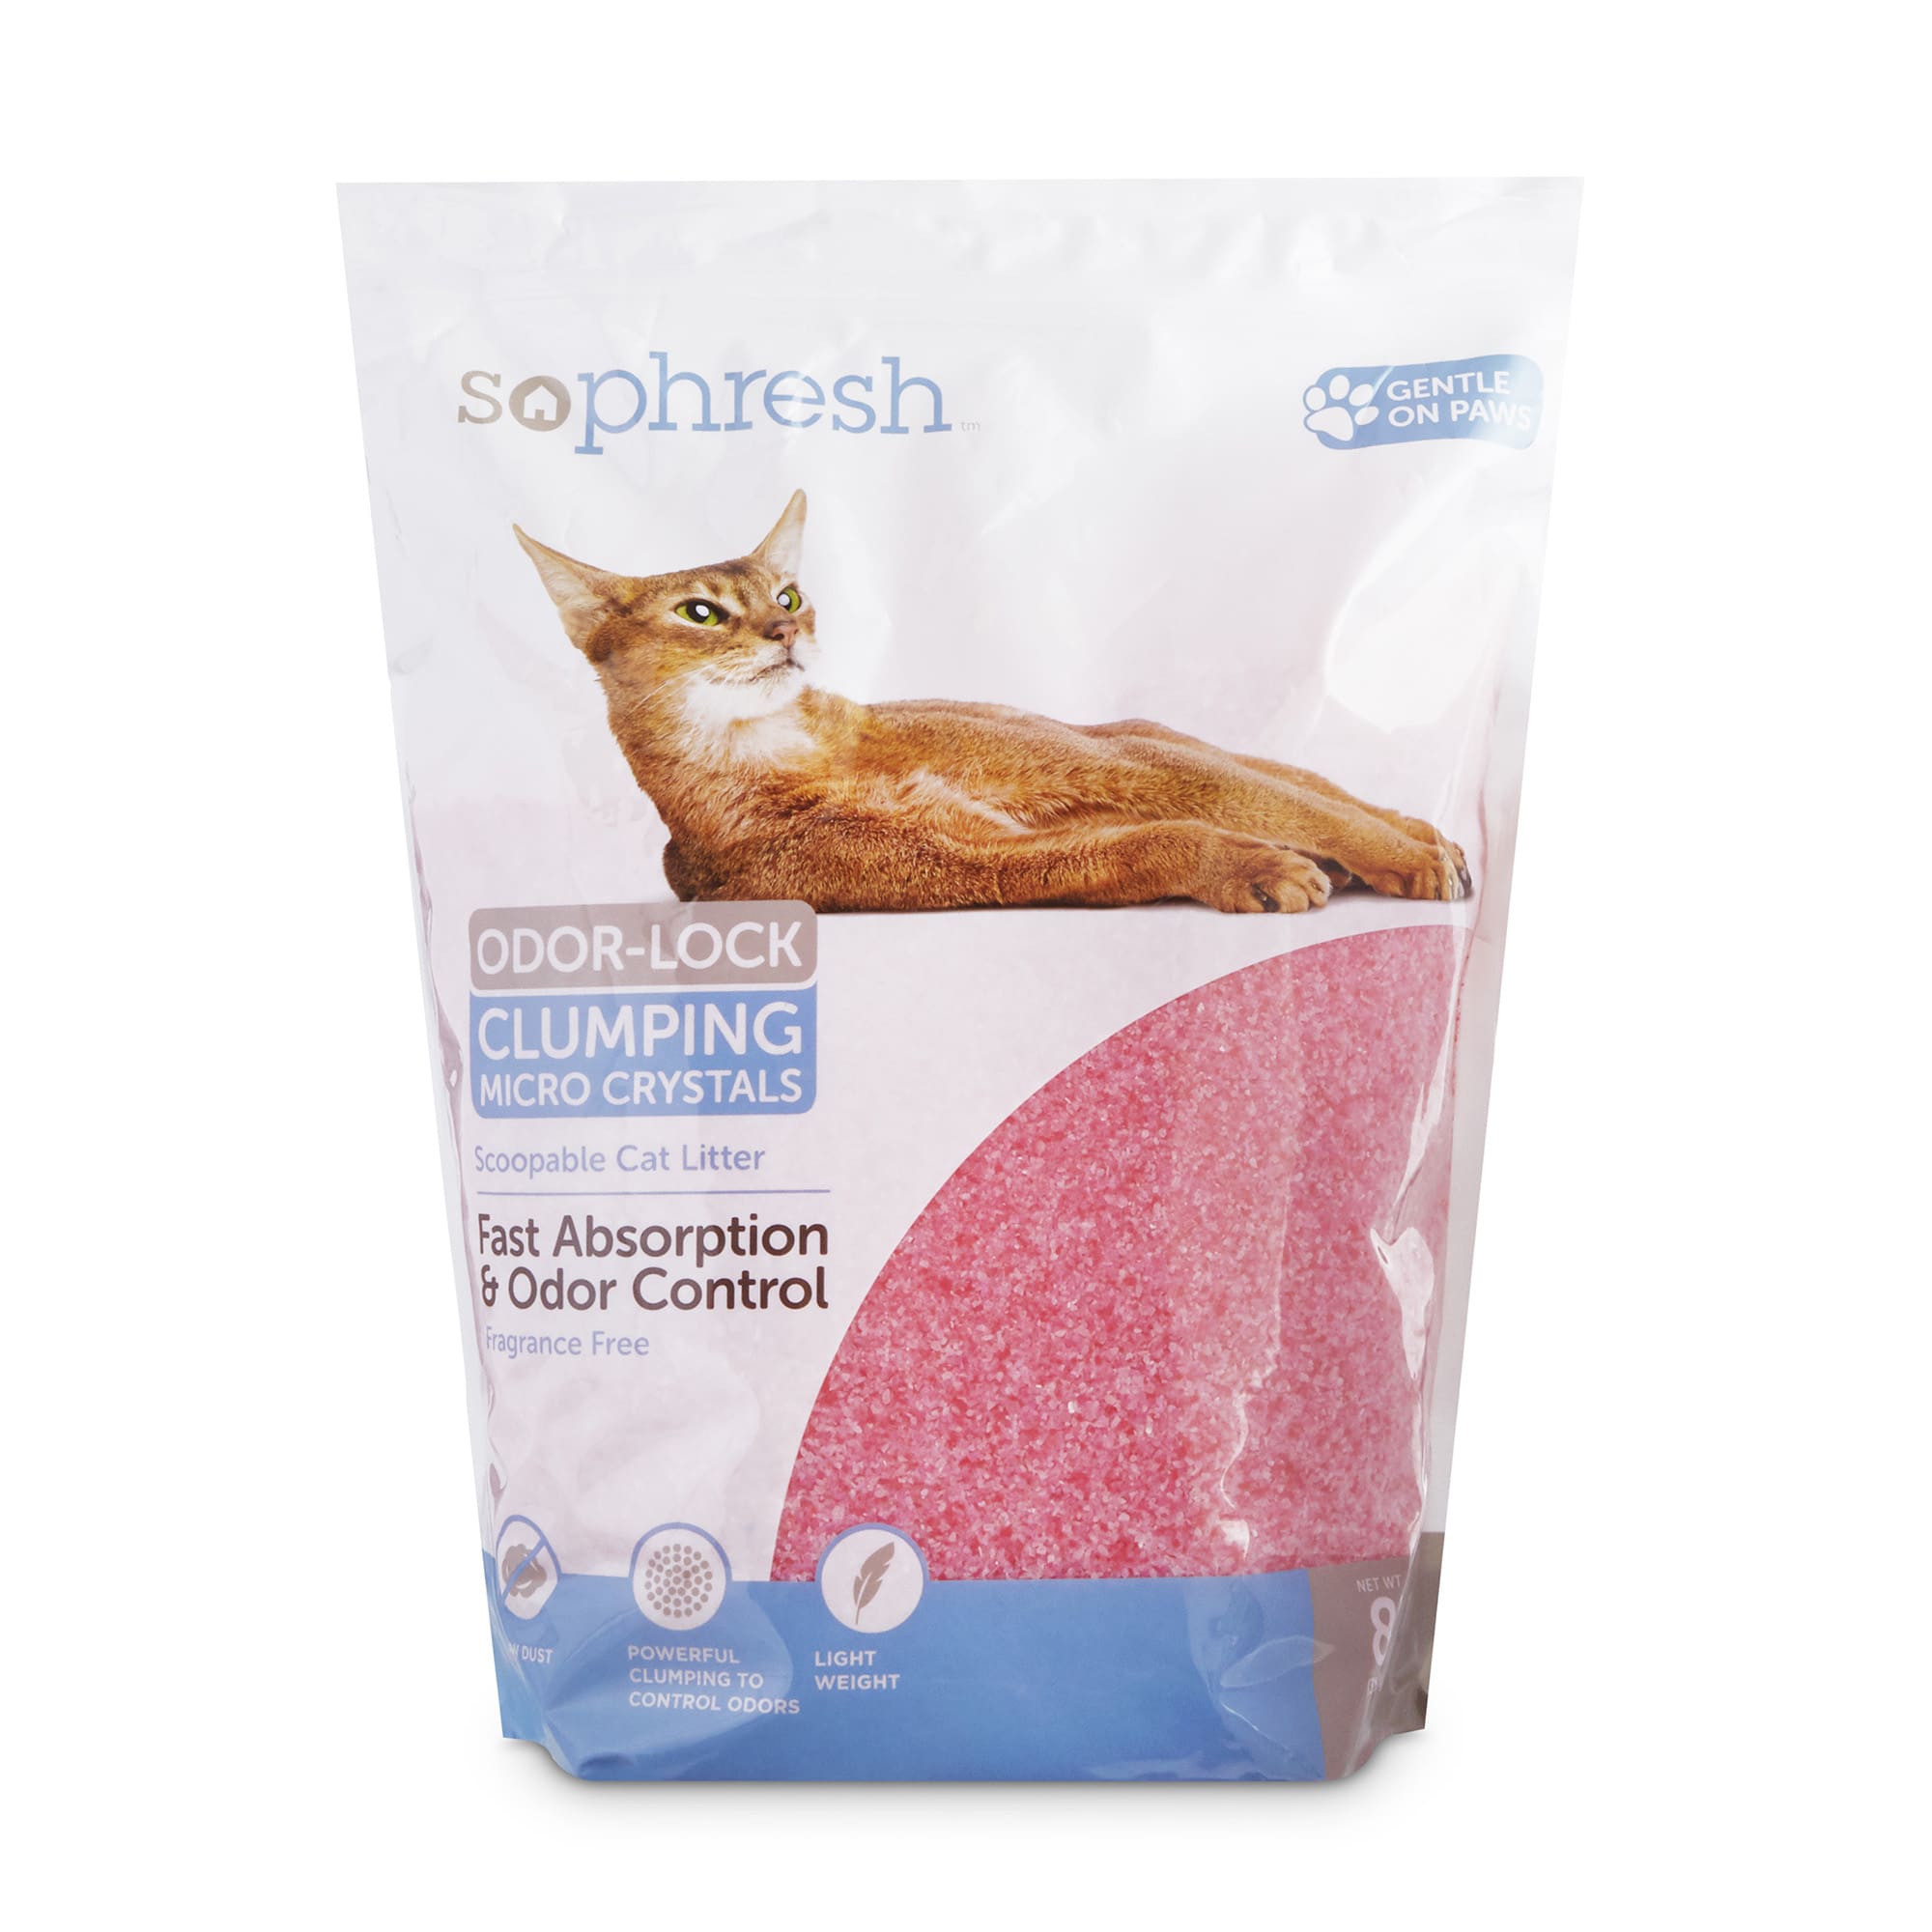 So Phresh Scoopable OdorLock Clumping Micro Crystal Cat Litter in Pink